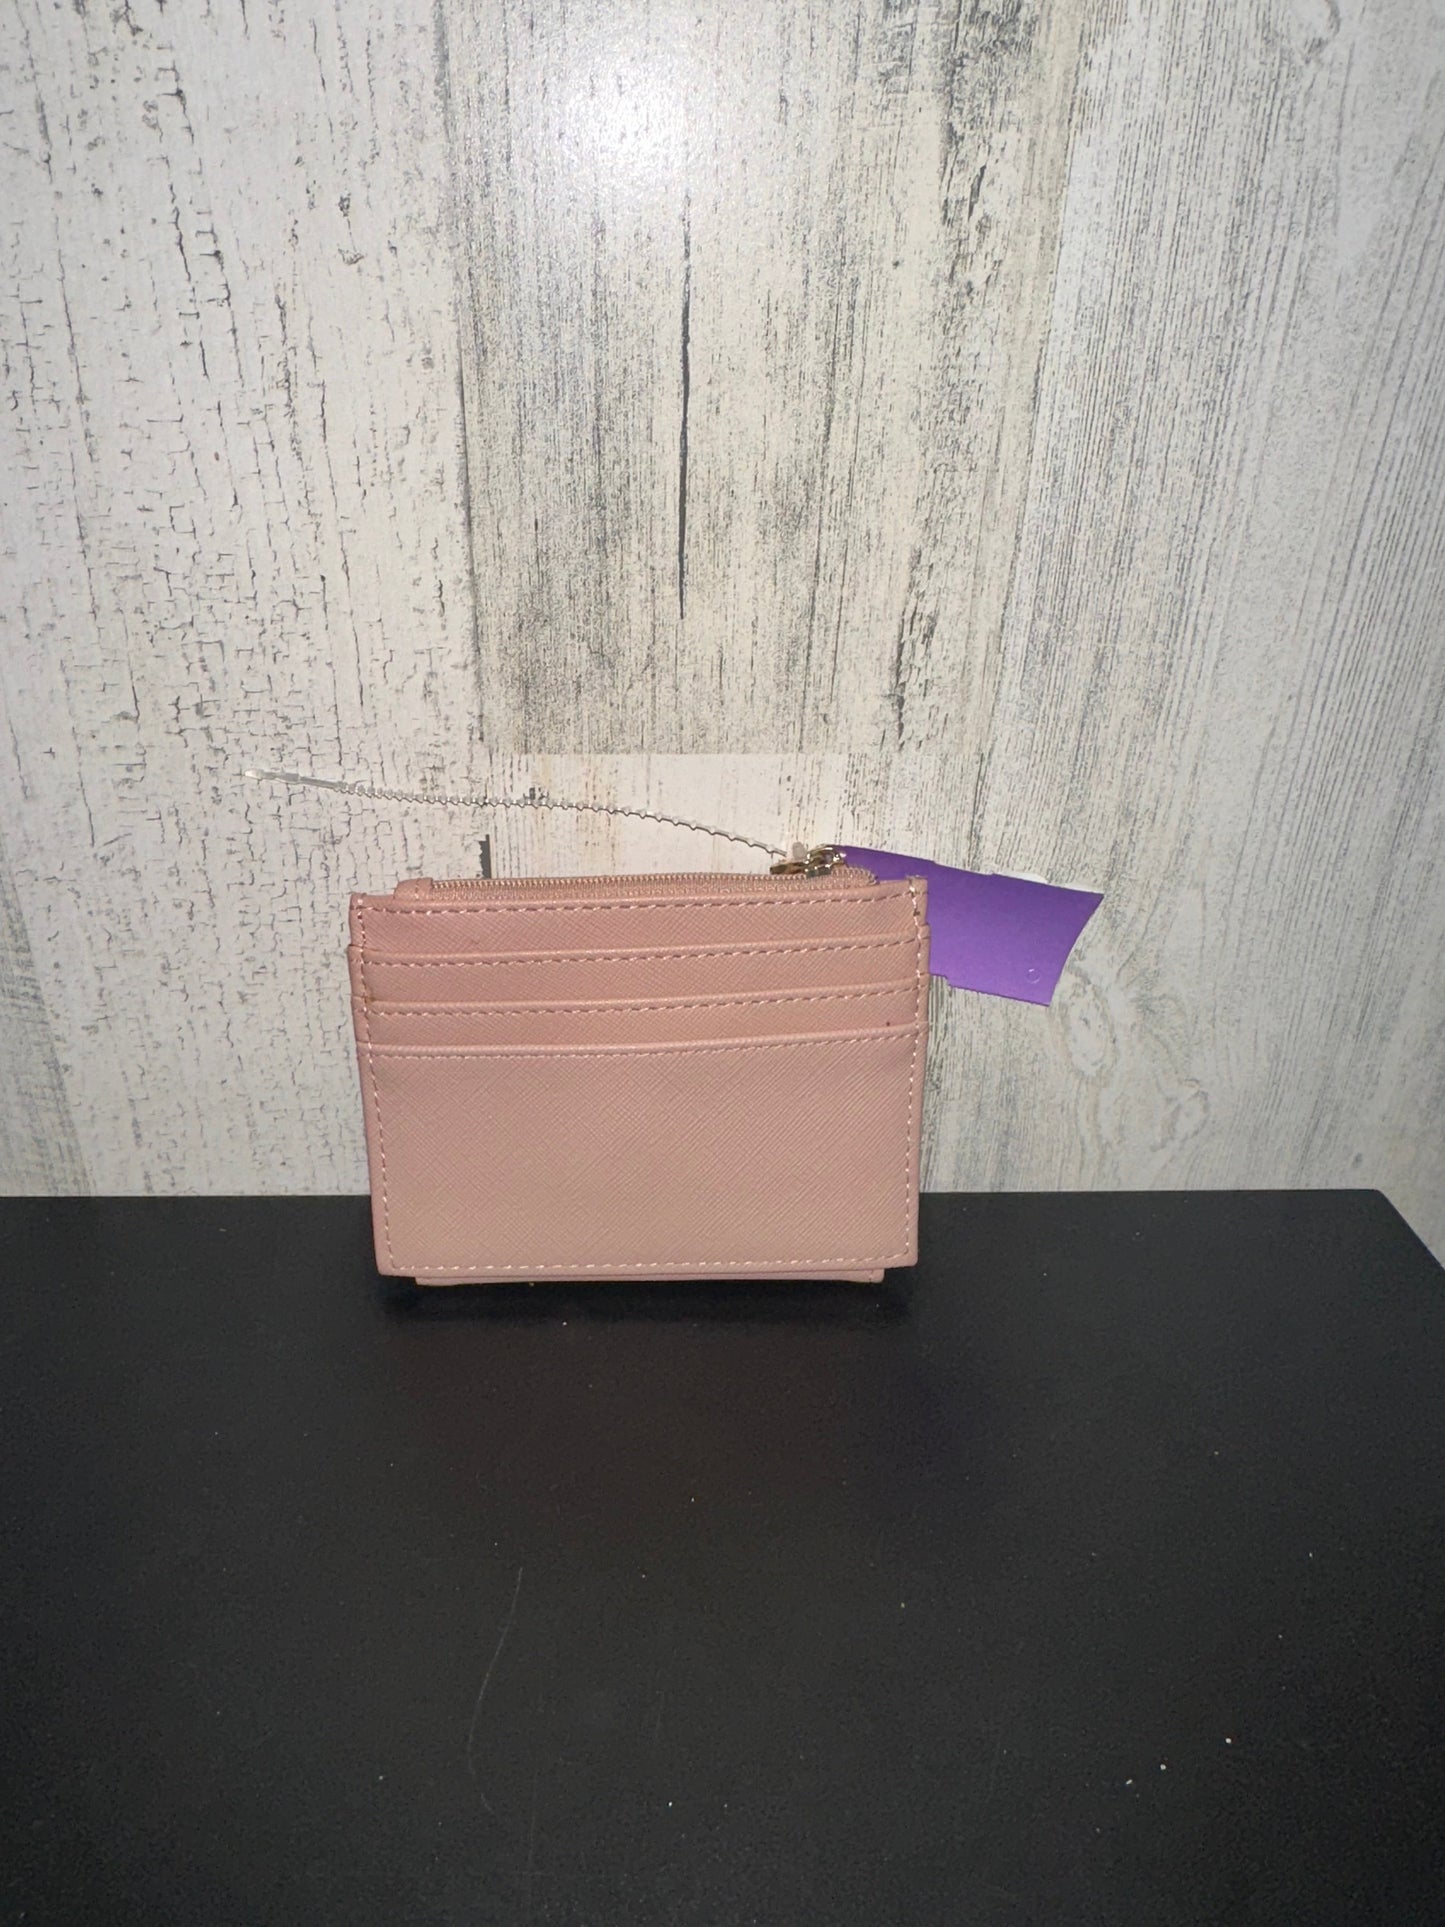 Wallet By Anne Klein  Size: Small